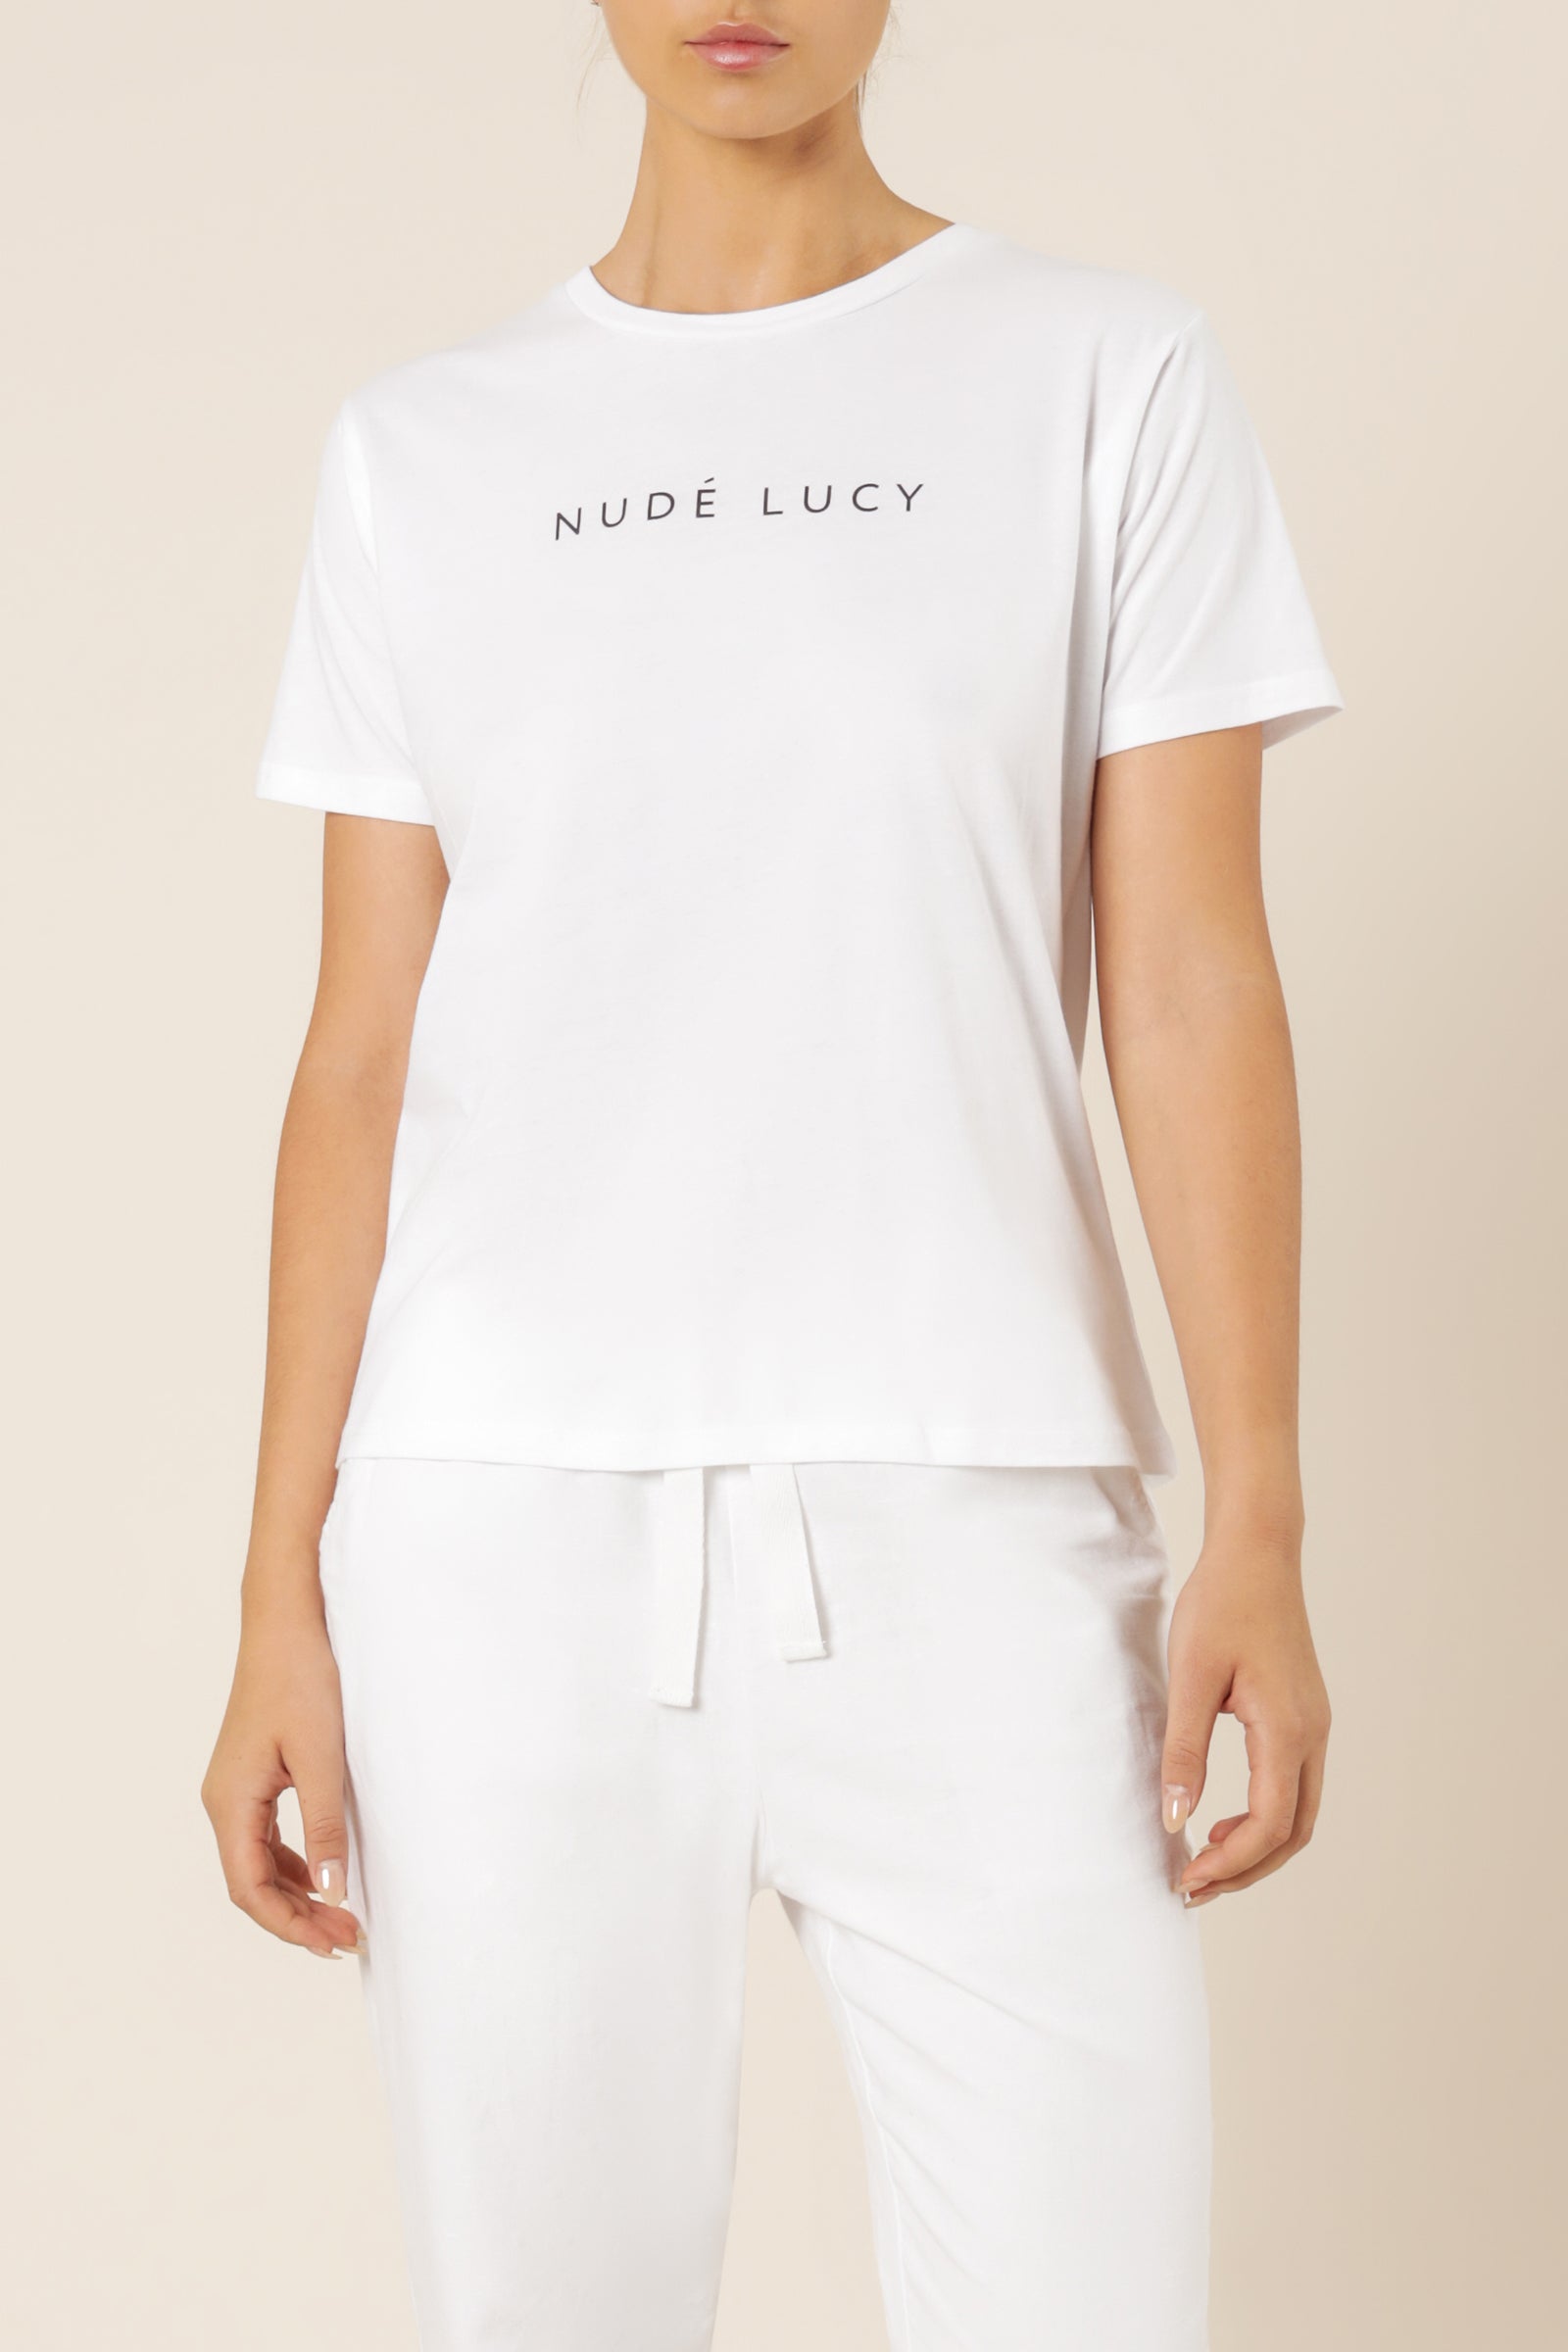 Nude Lucy Nude Lucy slogan tee white top